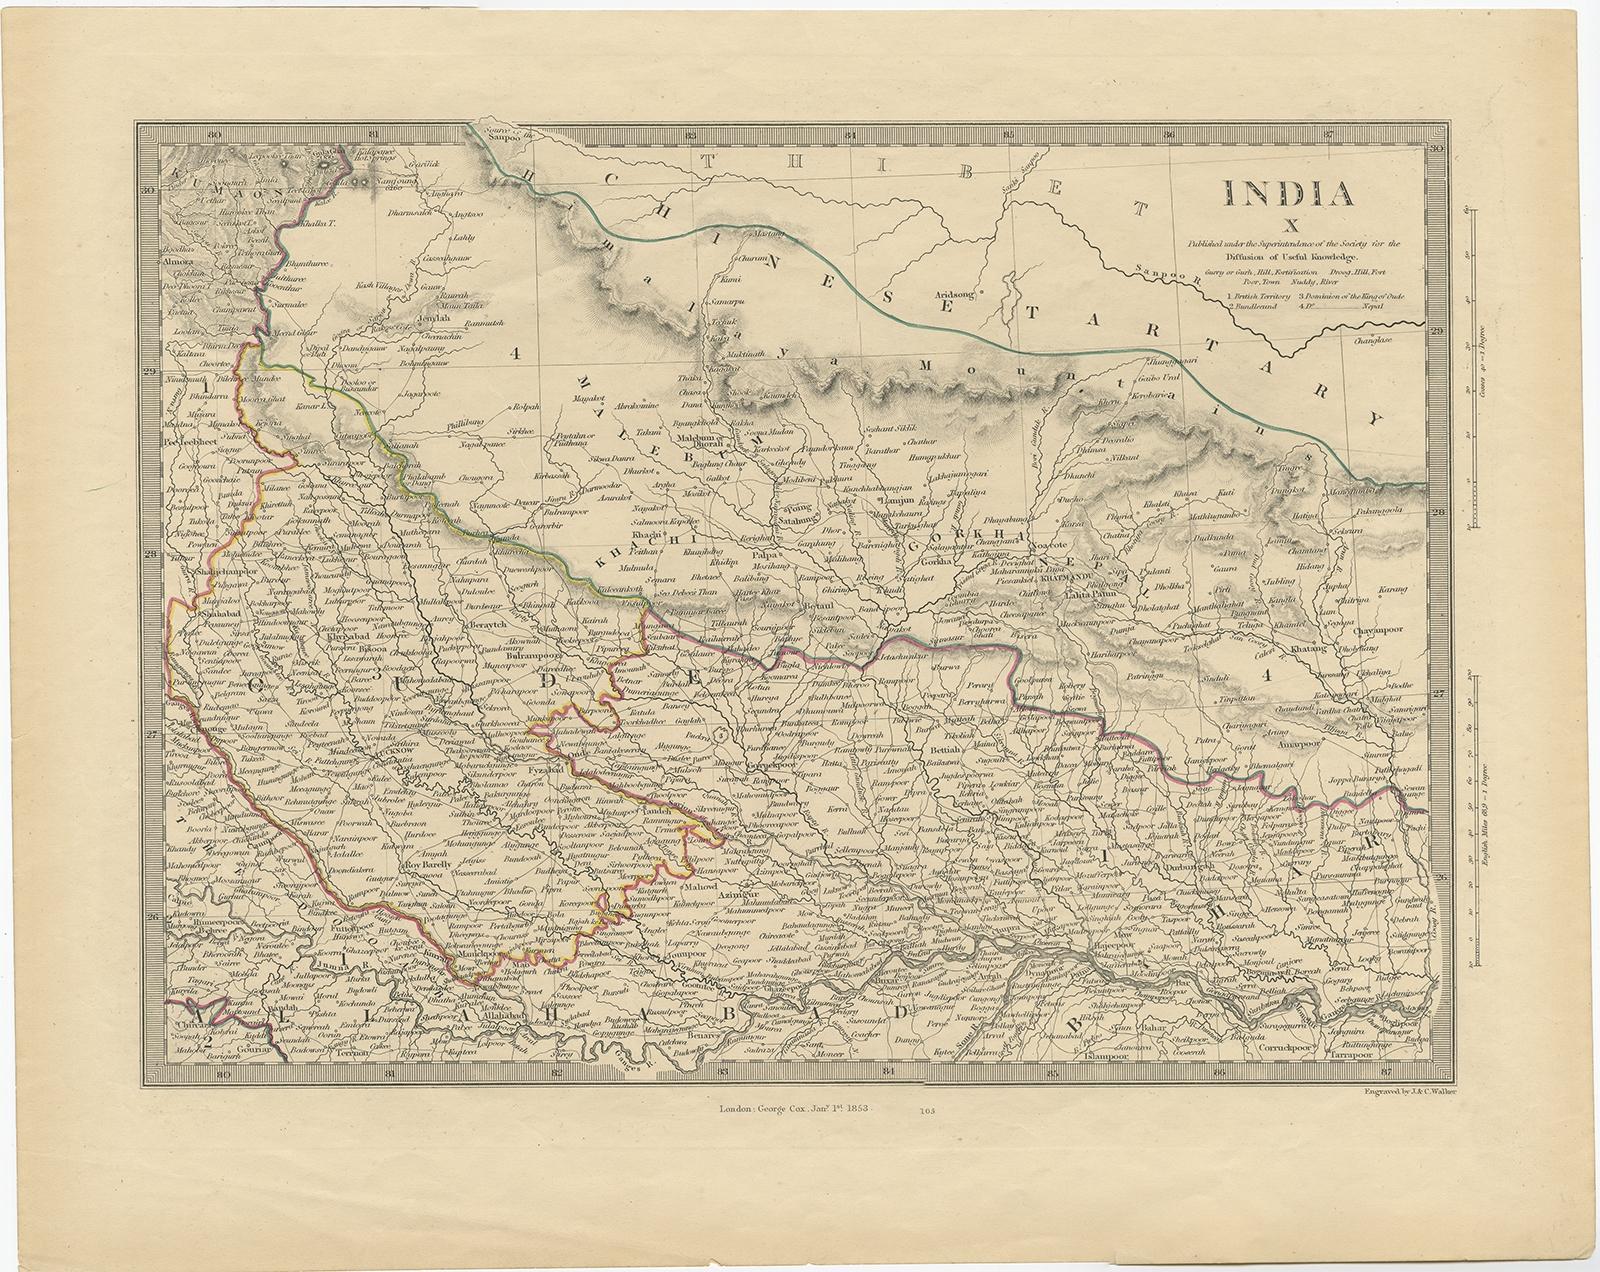 Antique map titled 'India X'. 

Old map of the the northeast region of India, including part of Himalayas and China. Great detail of landforms, rivers and water bodies, cities, towns, and ports. 

Artists and Engravers: Published by G. Cox,